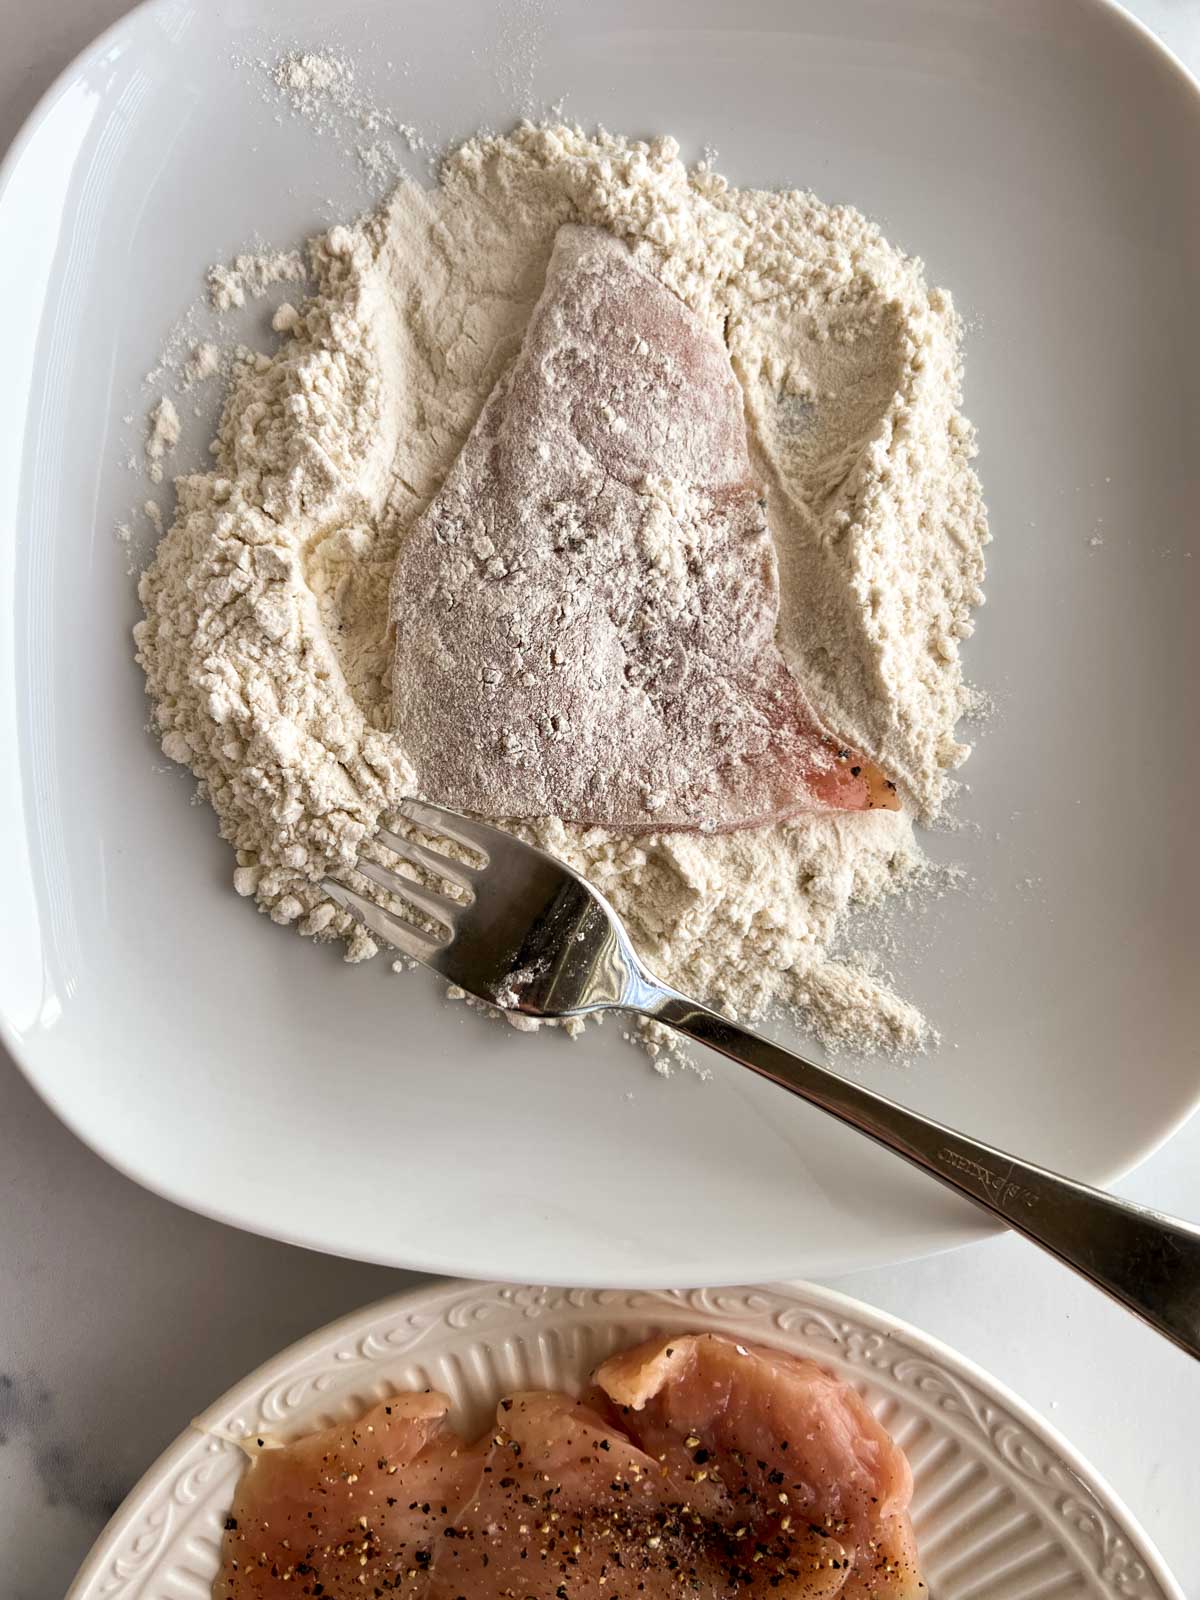 Chicken breast on a plate with flour